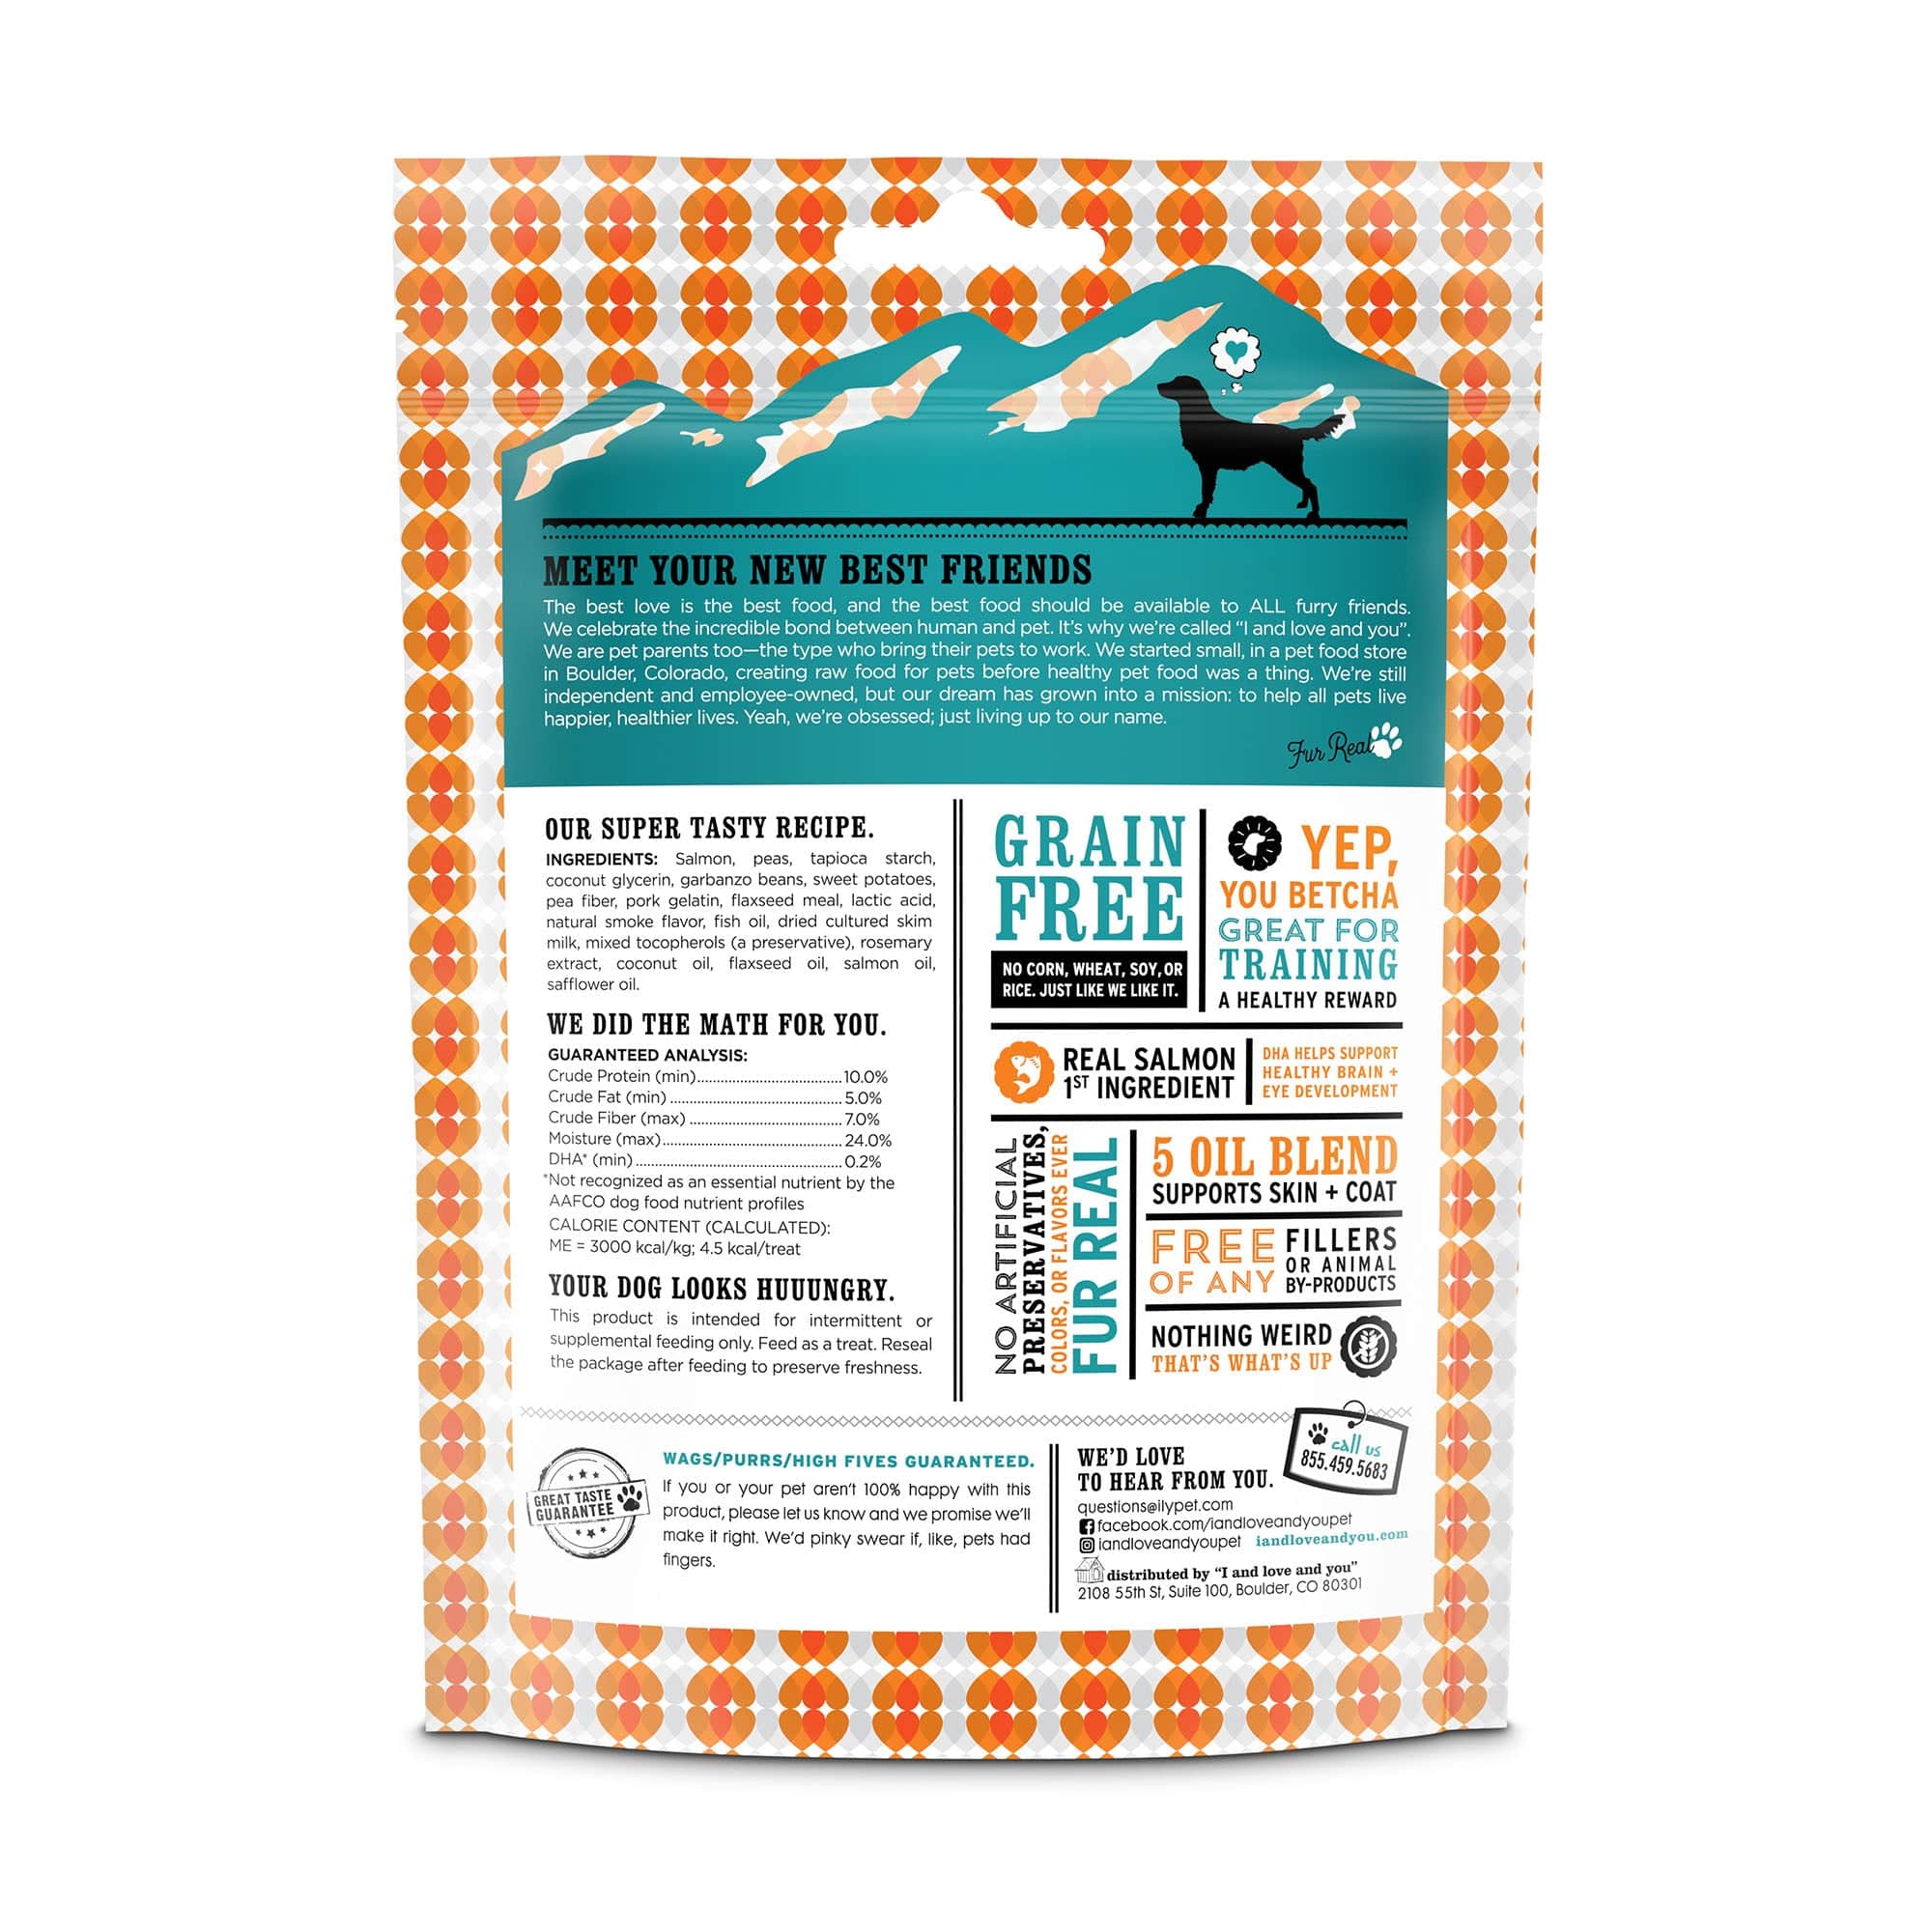 Super Smarty Hearties dog treats package back side with list of ingredients, instructions and barcode